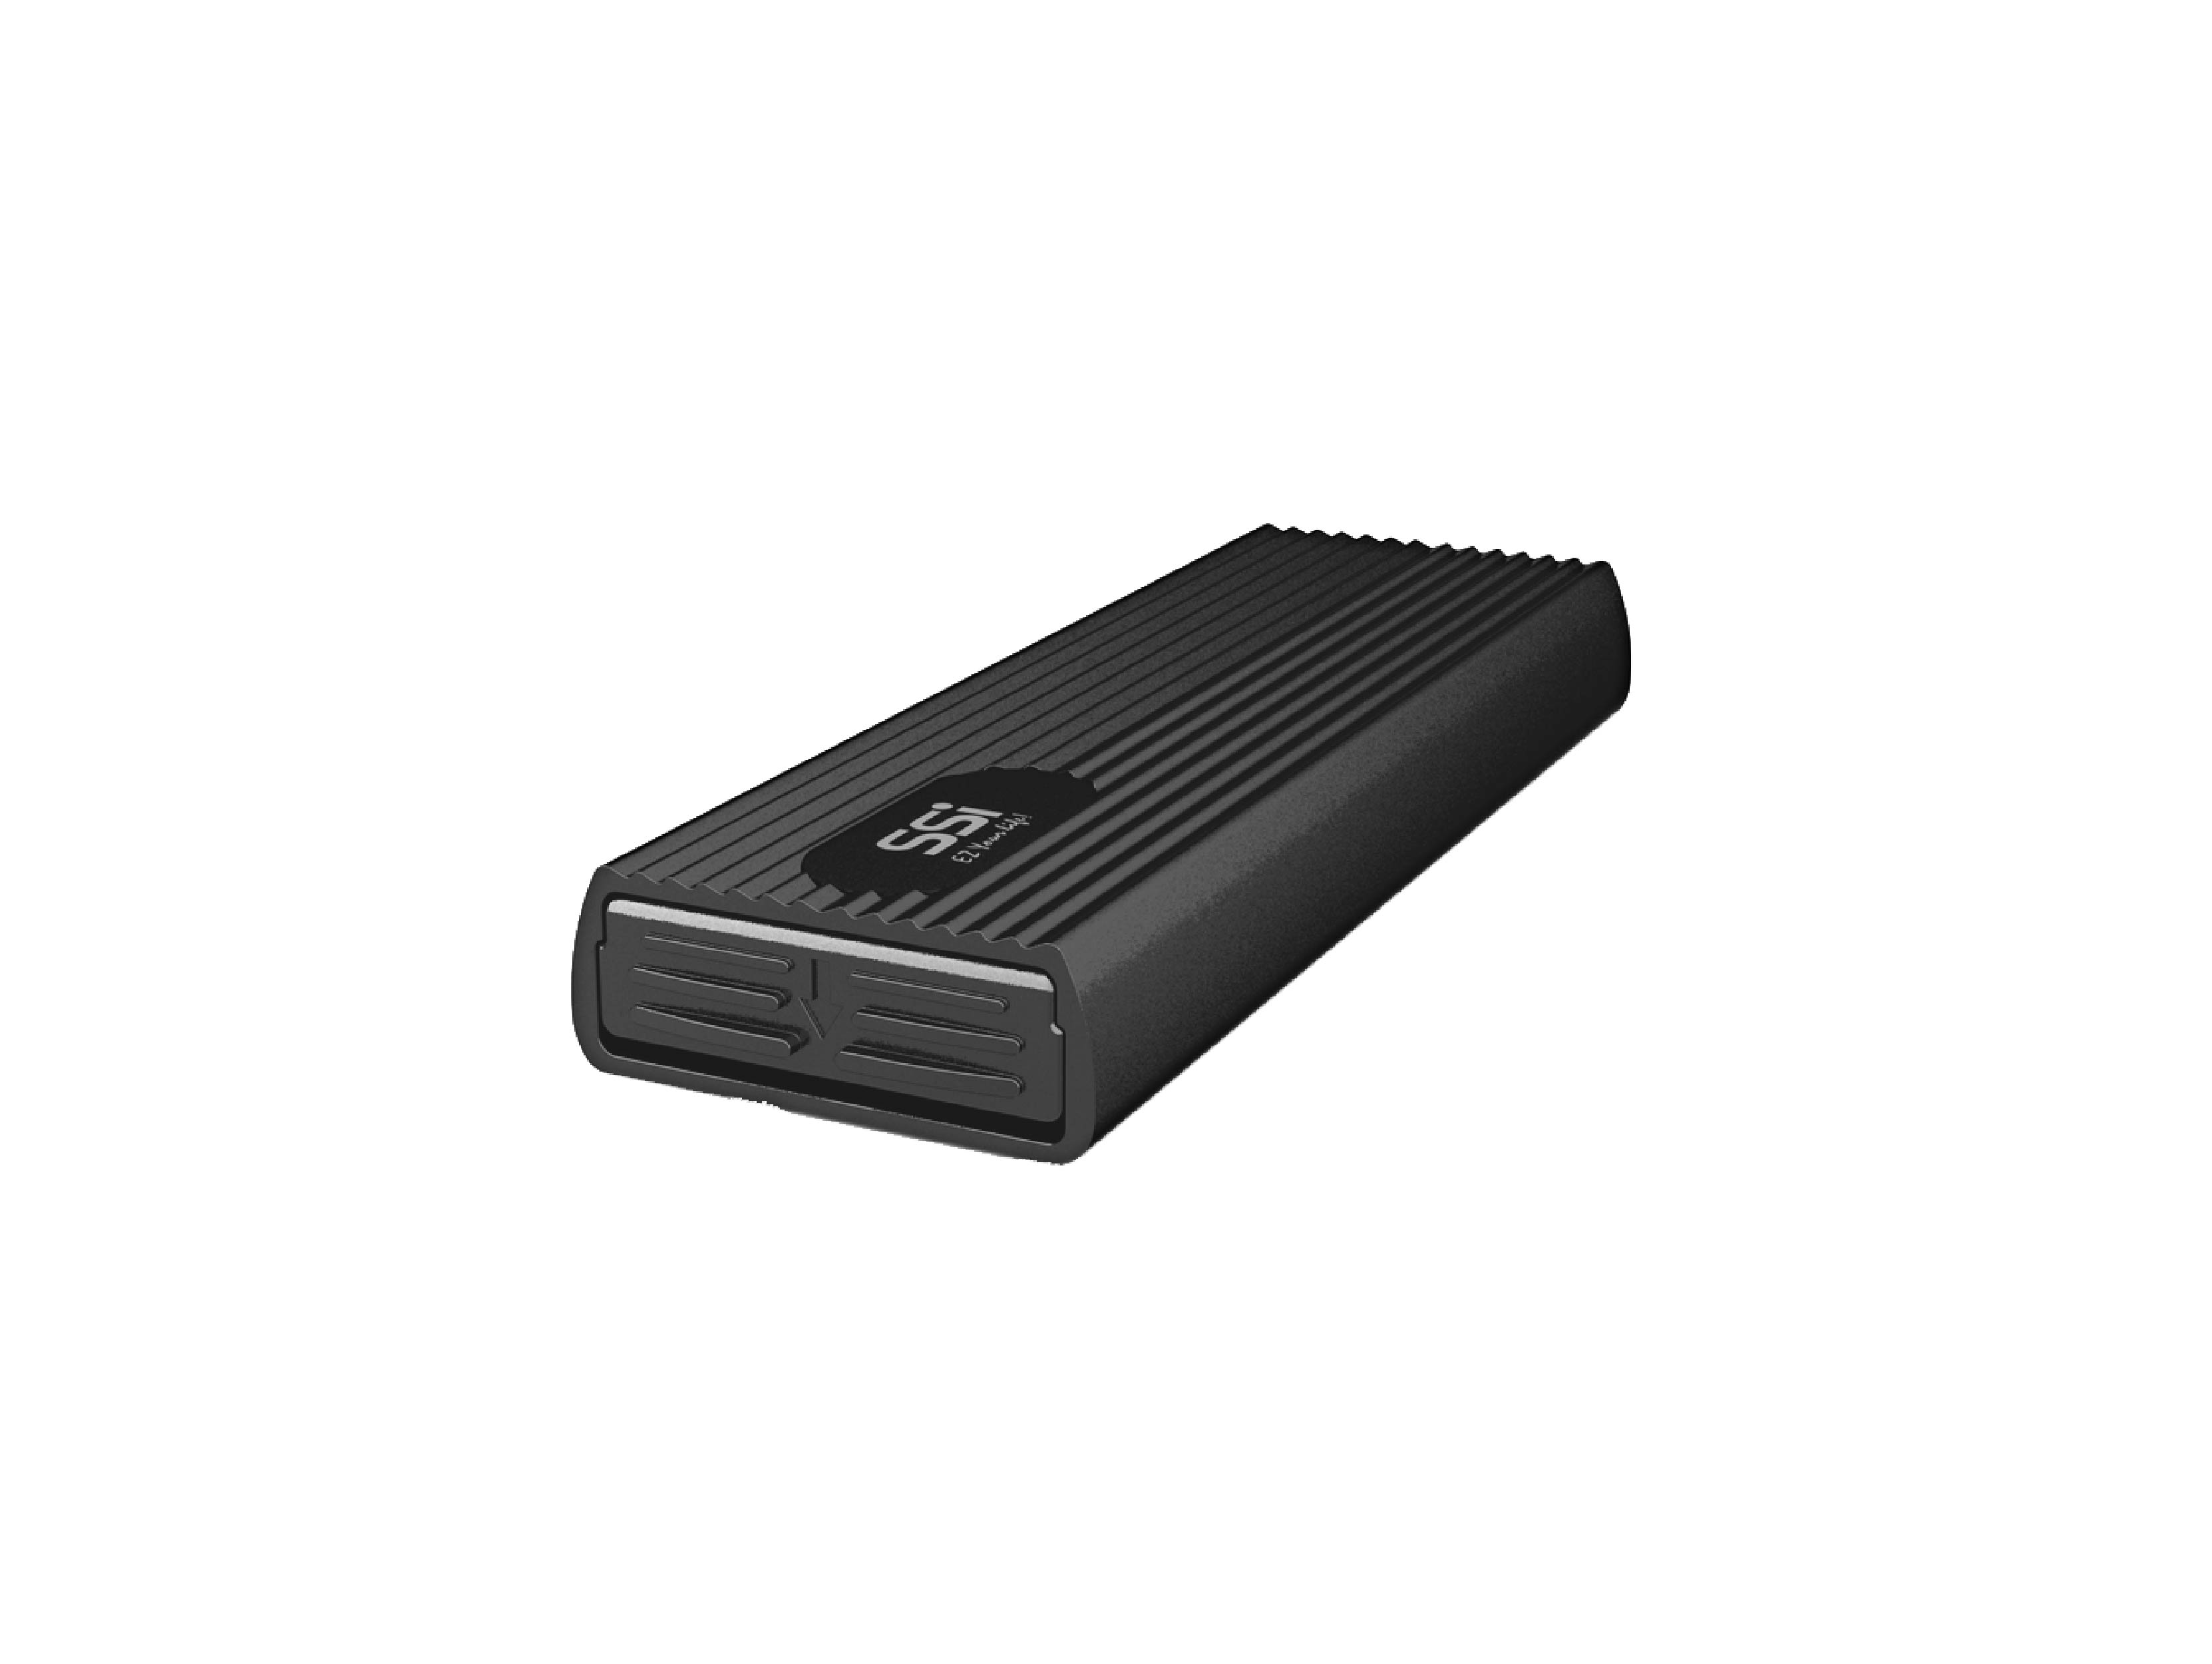 M.2 NVMe/SATA SSD Enclosure, Finned Design (SI-8612US31C), compatible with 1x B+M Key M.2 SATA SSD 6Gbps, USB3.2 -C 10Gbps to host.